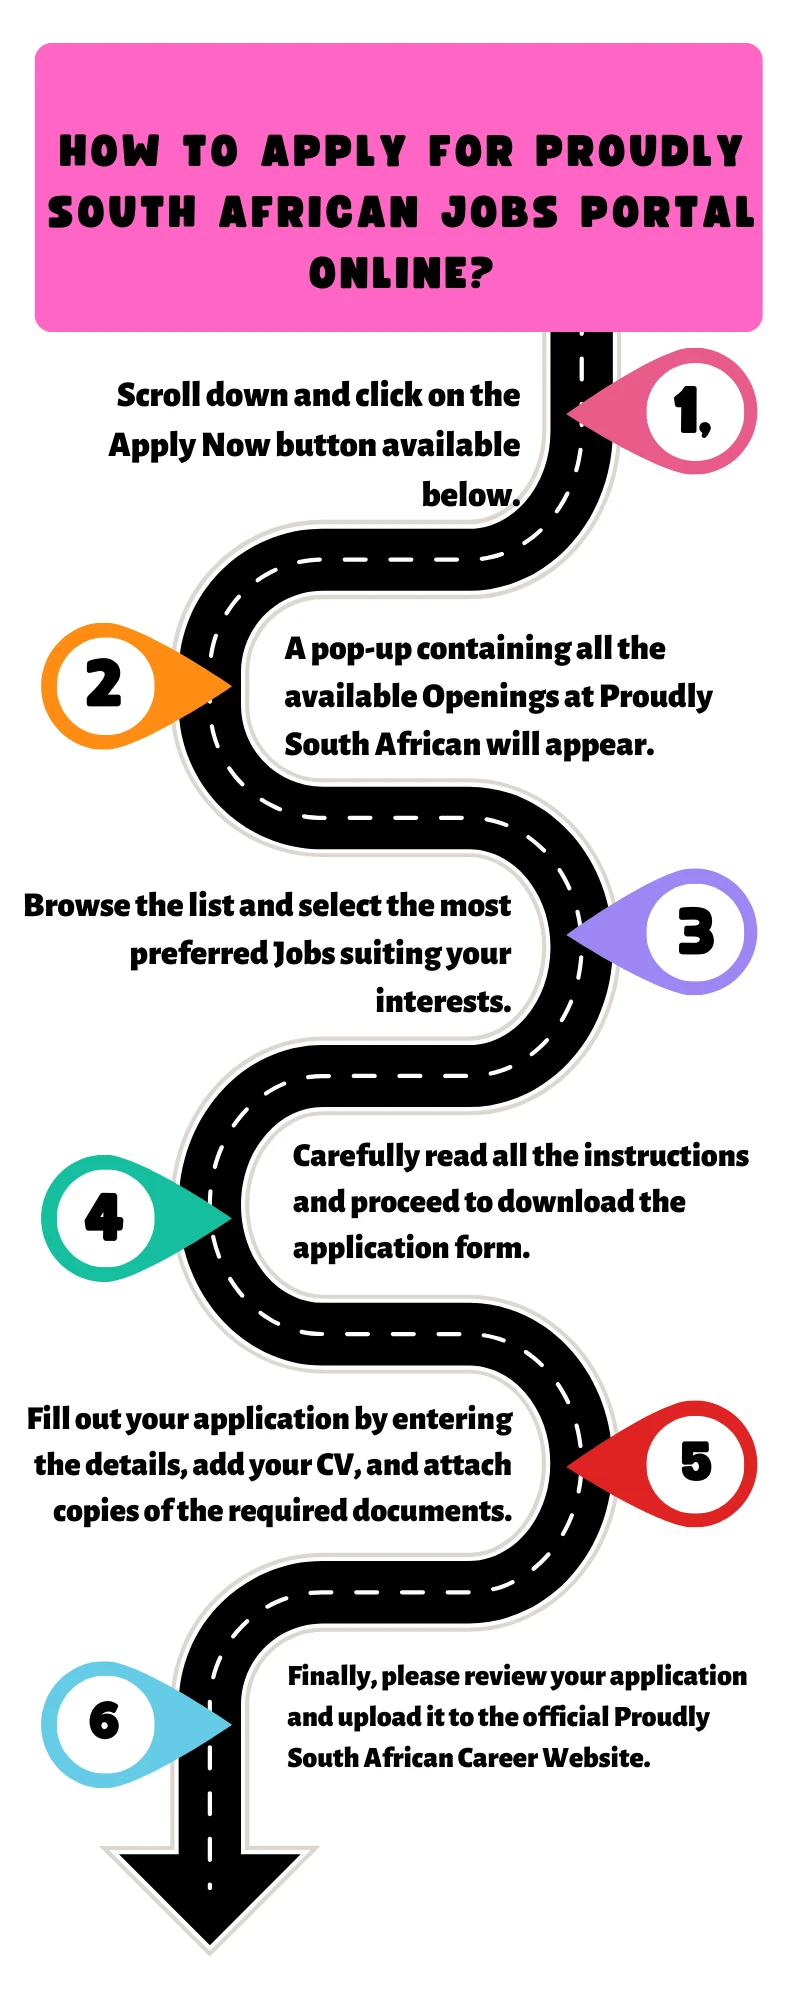 How To Apply for Proudly South African Jobs Portal Online?